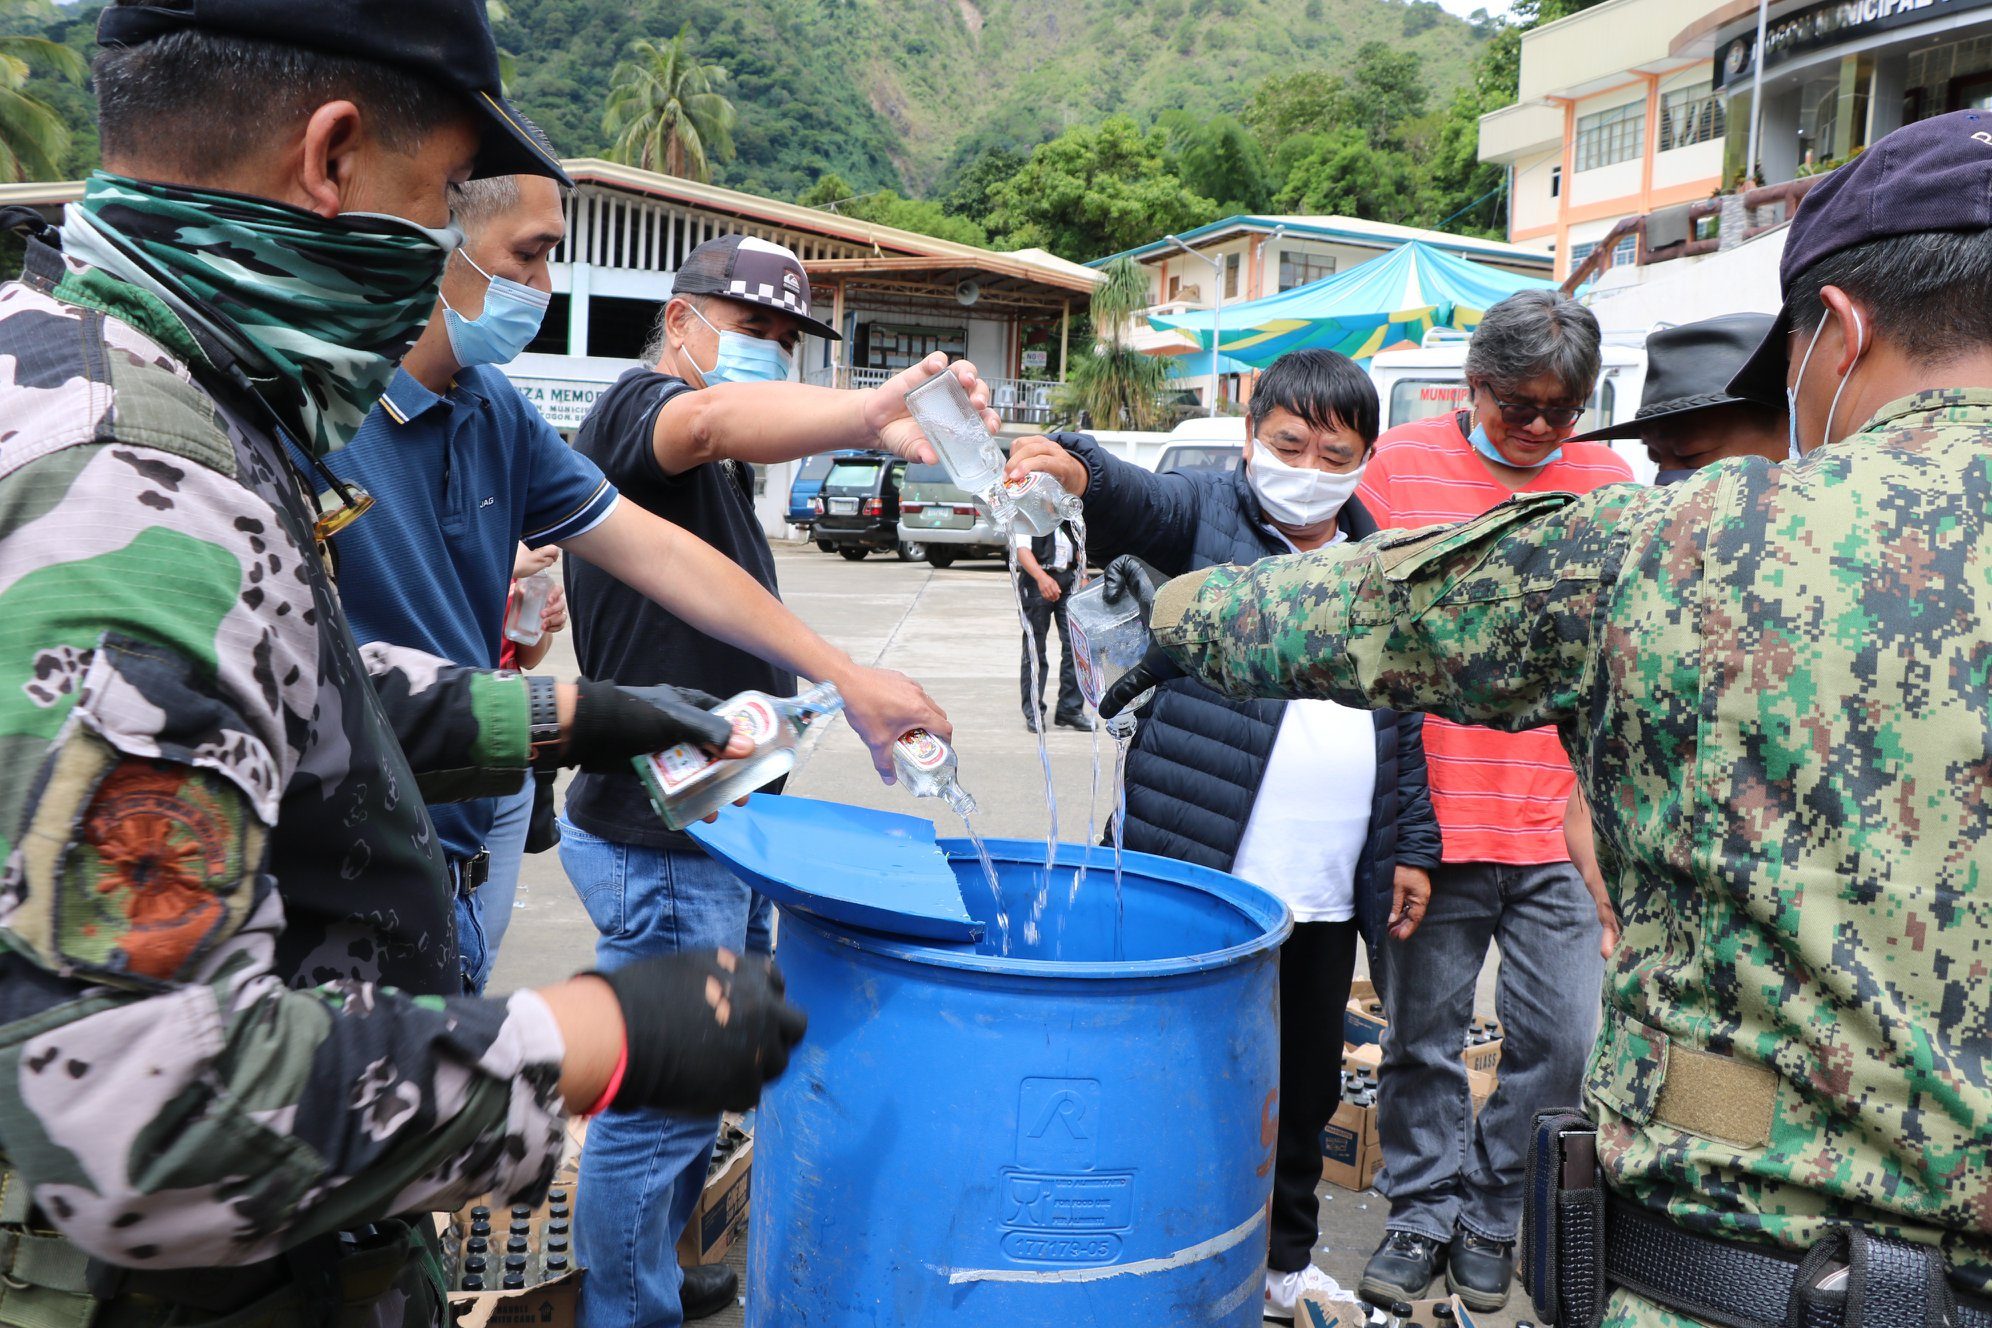 Benguet town mayor uses seized gin as road disinfectant